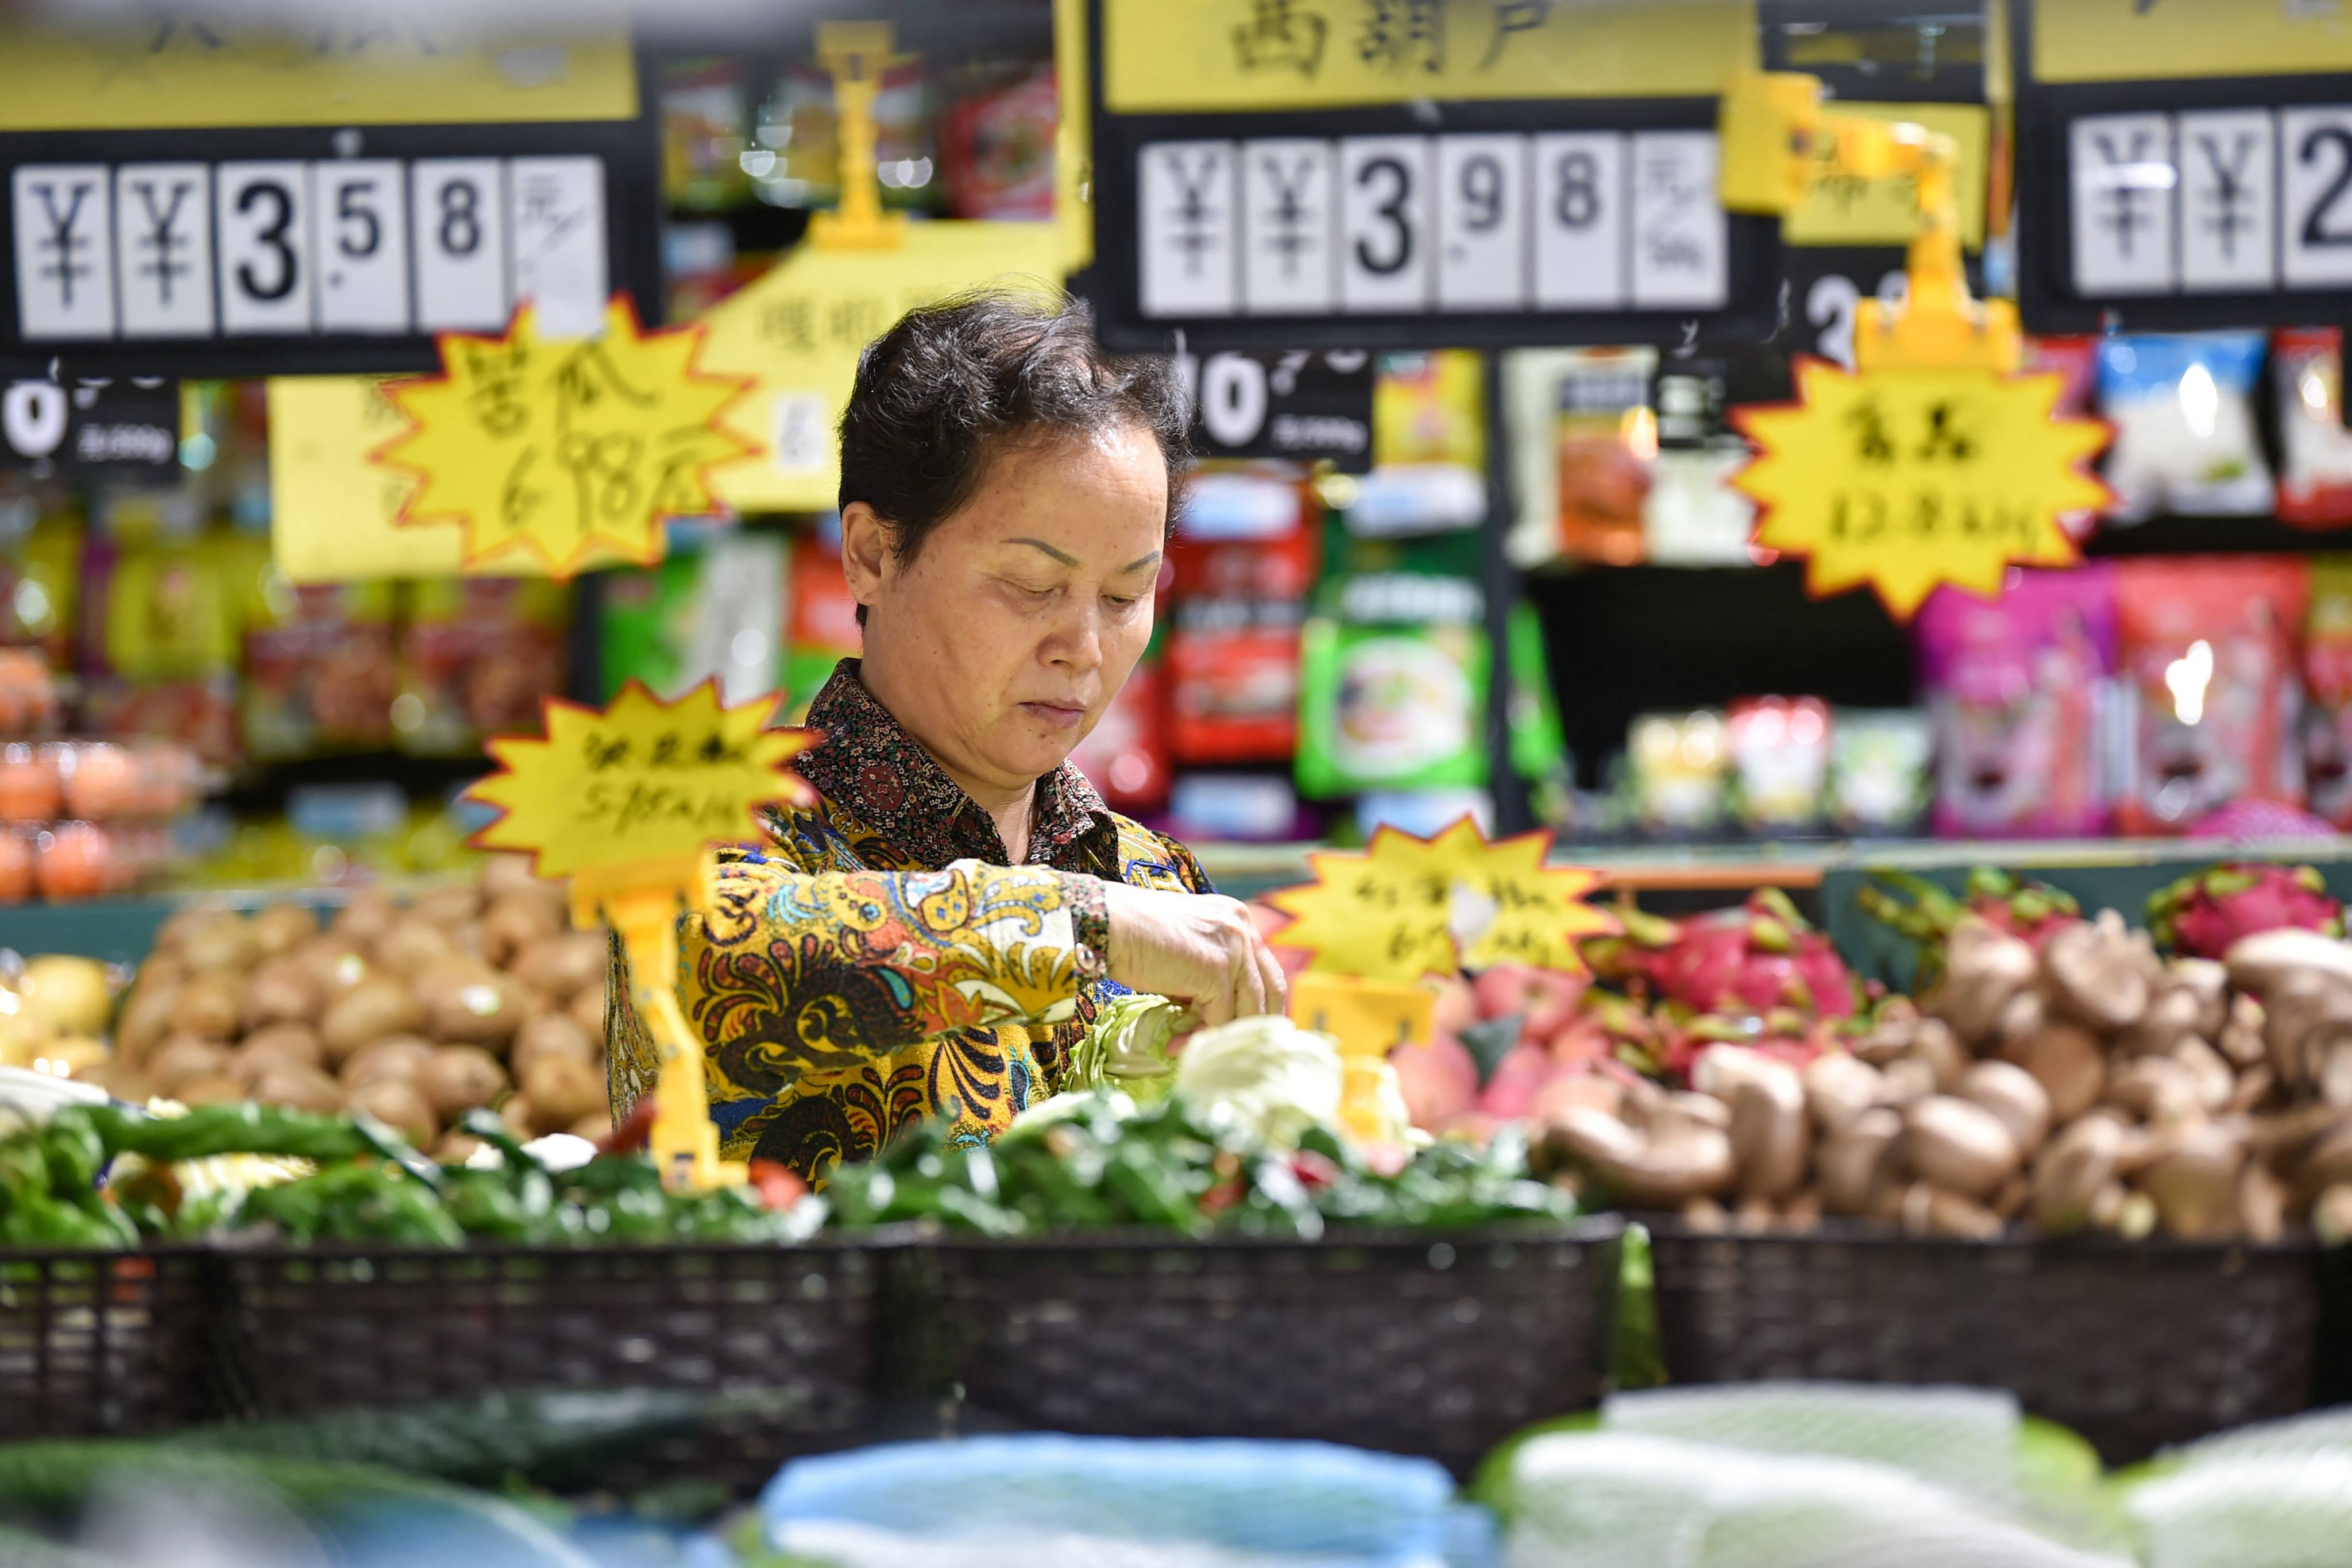 A customer shops at a supermarket in Nanjing, in China’s eastern Jiangsu province on October 13, 2023. Photo: AFP